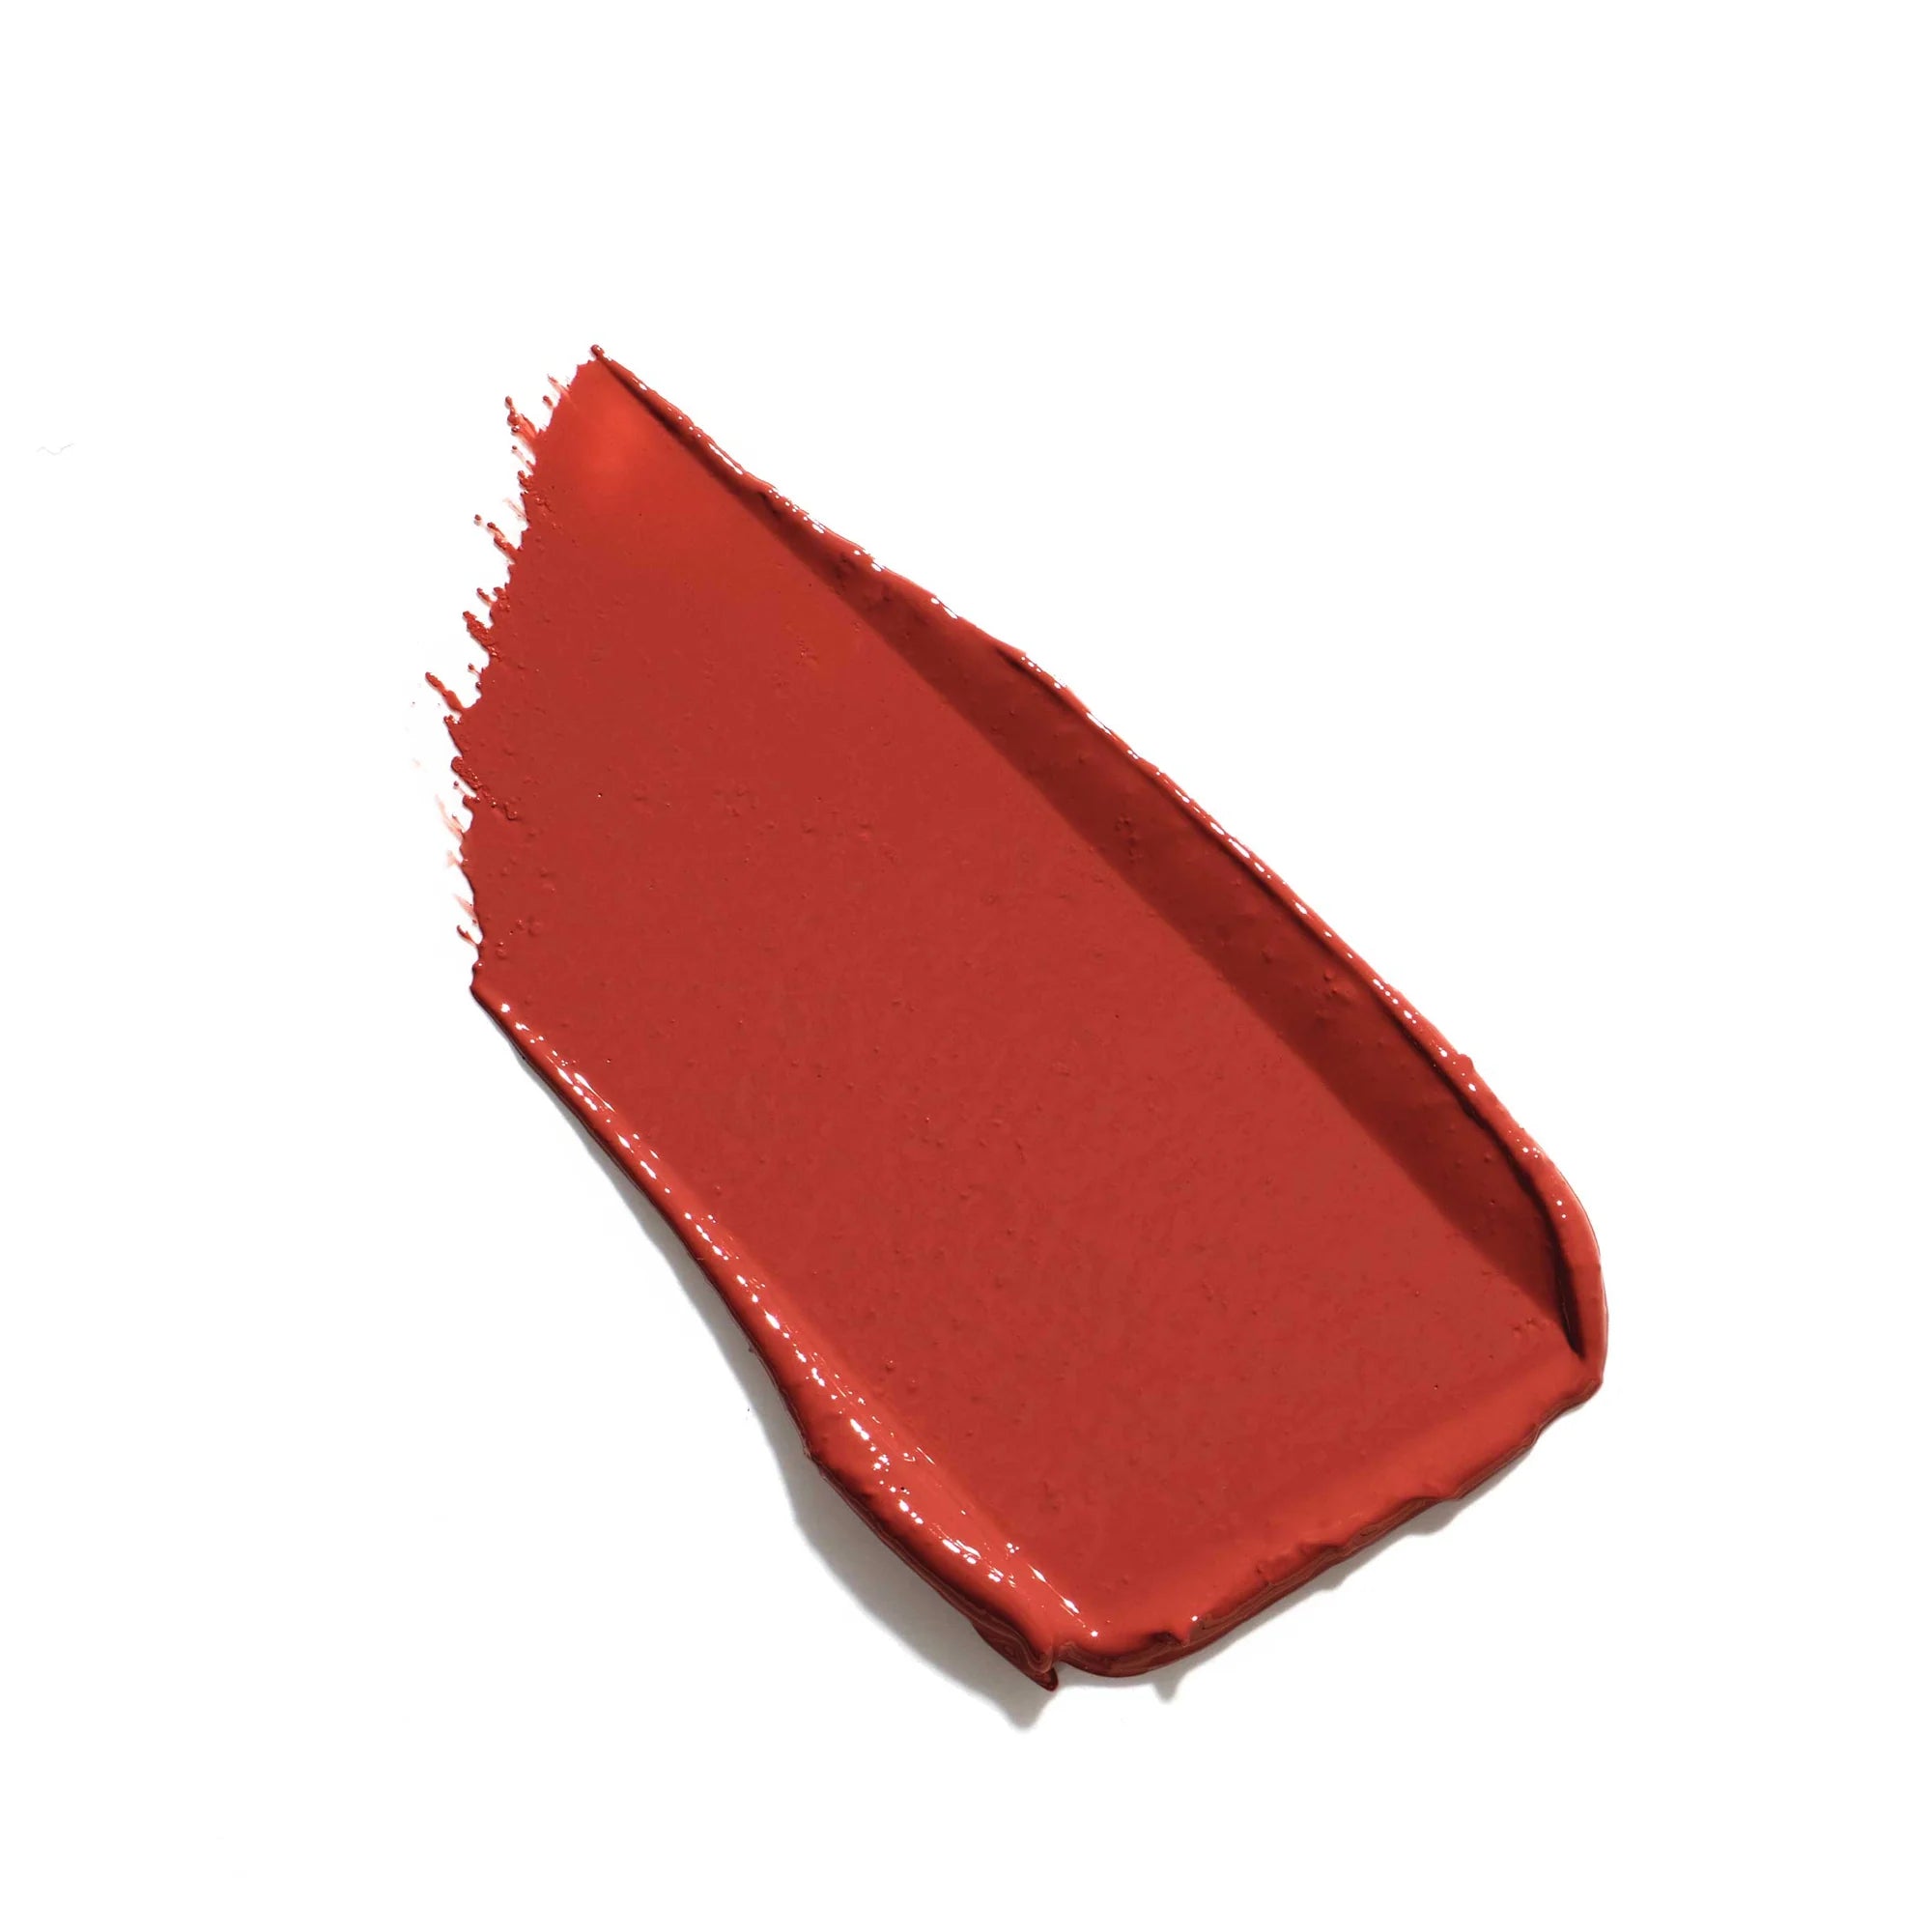 Jane Iredale's ColorLuxe Hydrating Cream Lipstick - swatch and color Scarlet - cool medium soft red